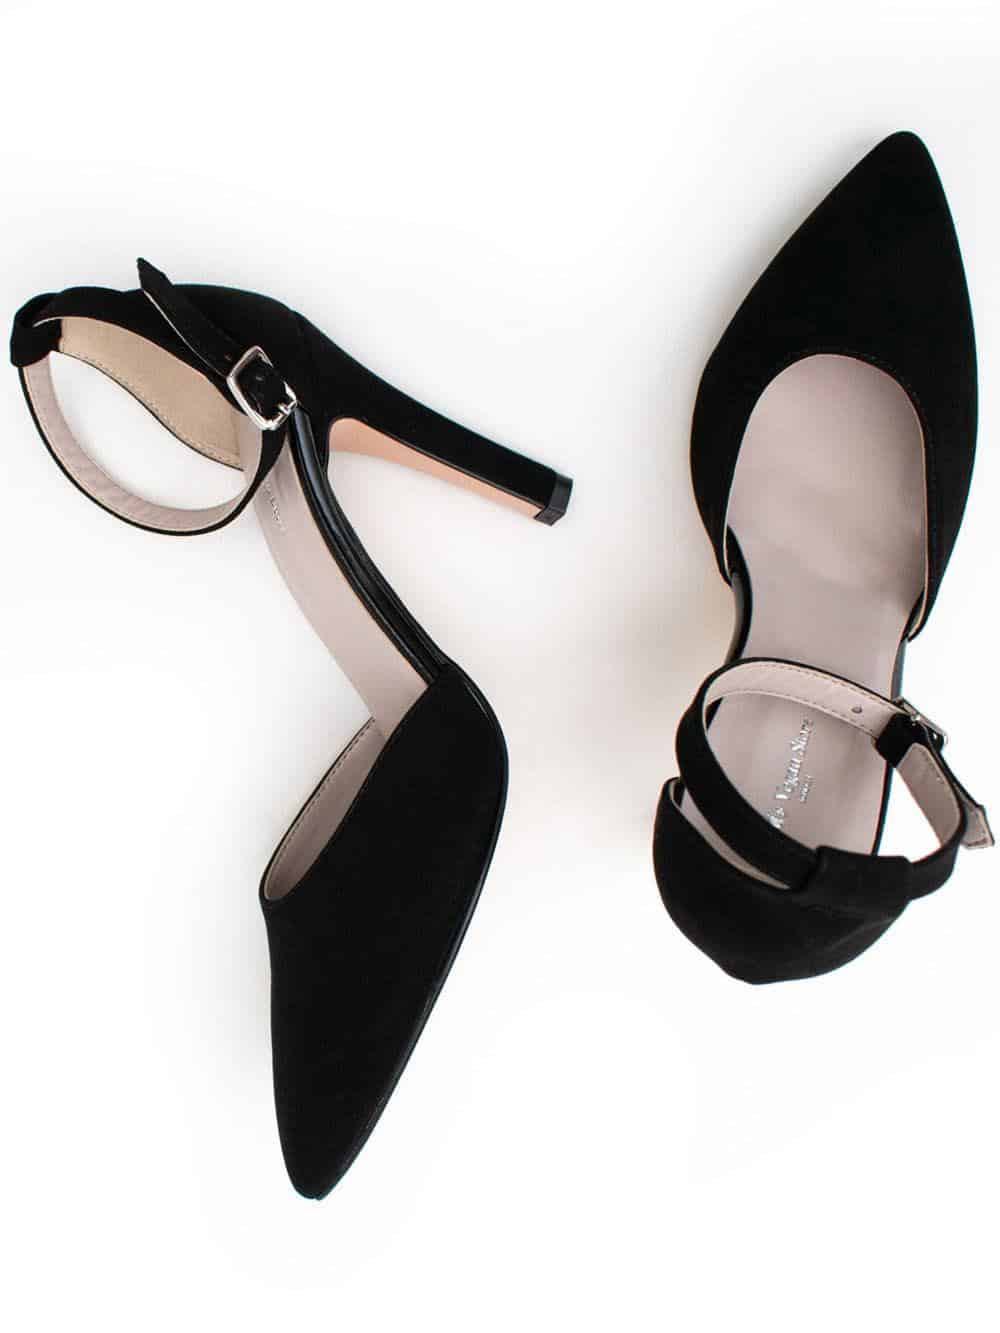 Black stiletto heels with ankle strap